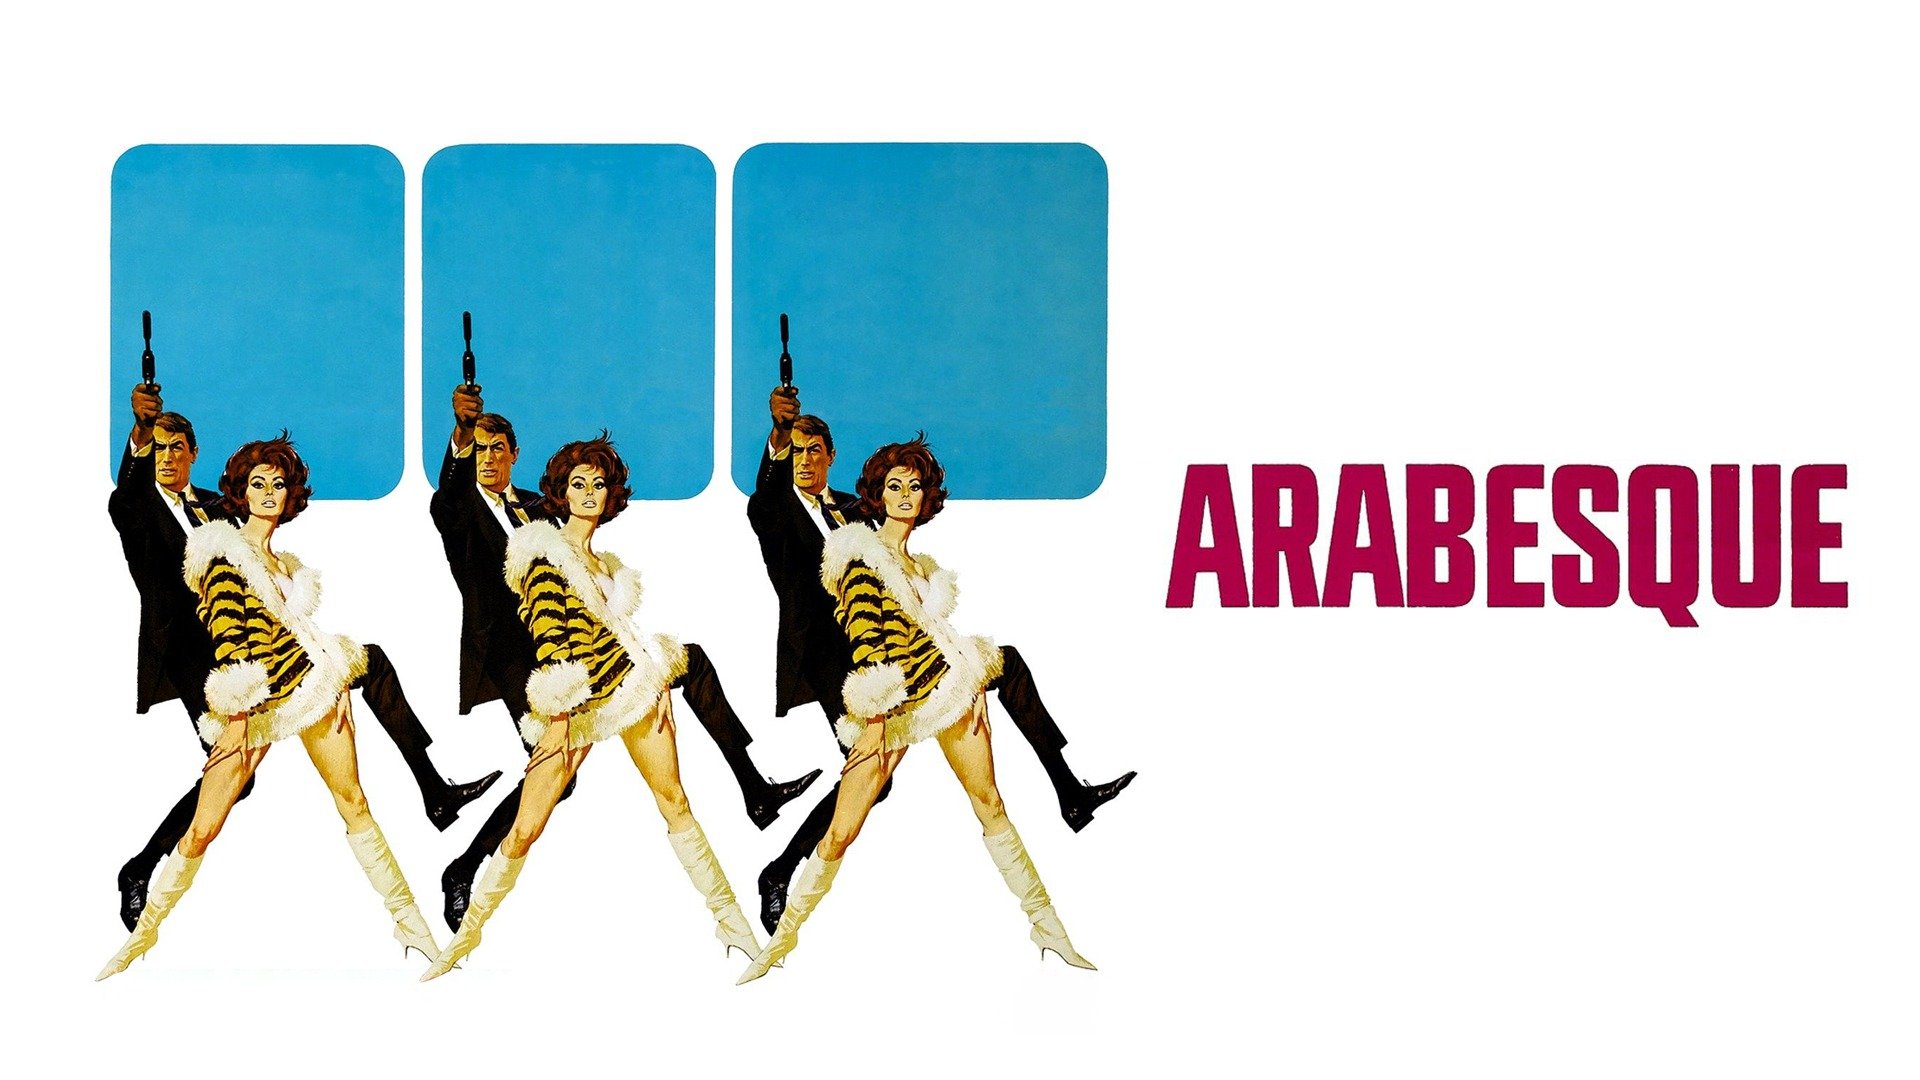 38 Facts about the movie Arabesque - Facts.net